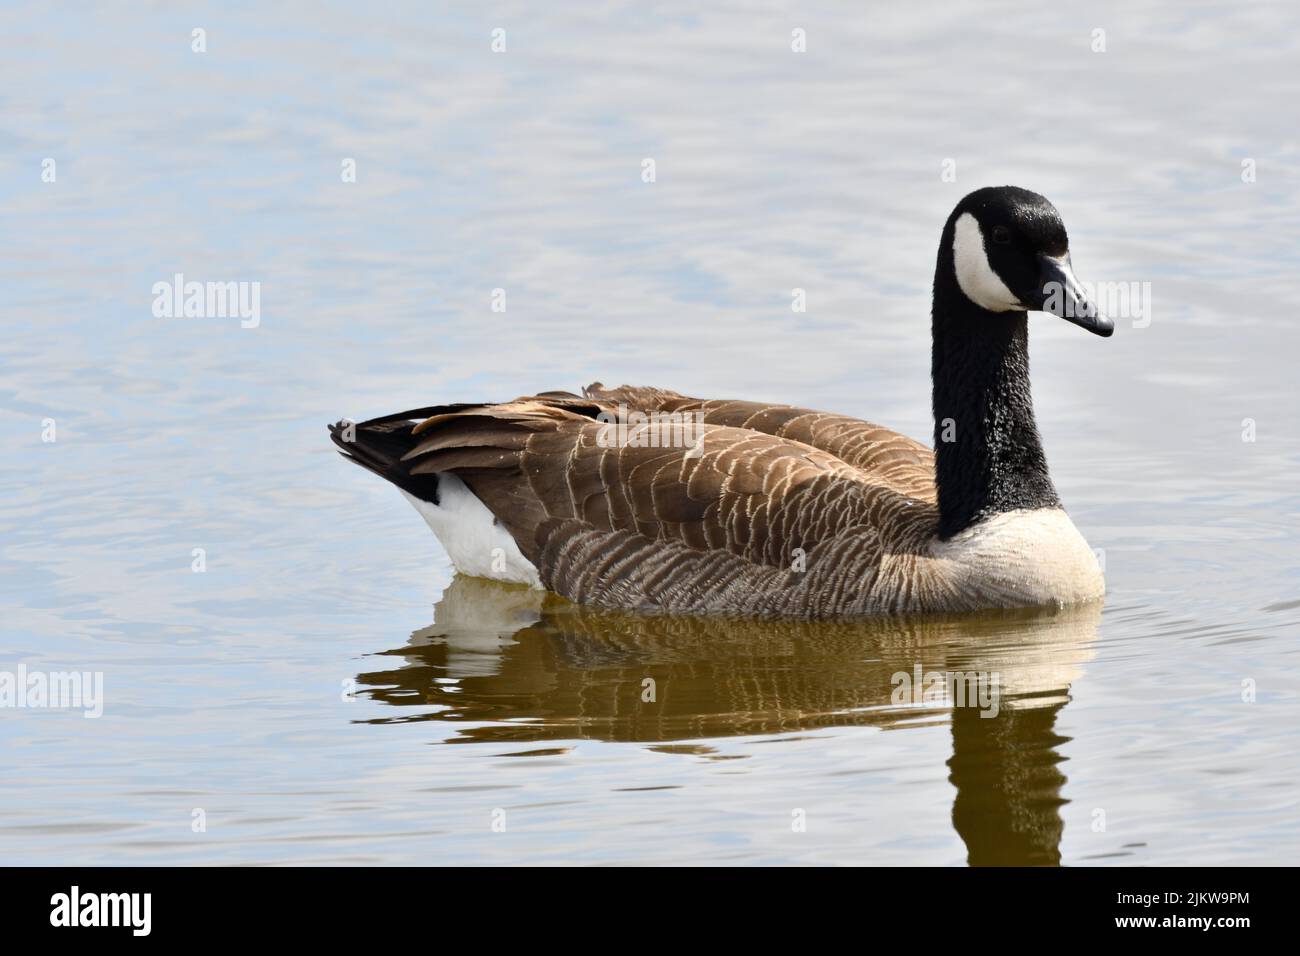 A closeup of the Canada goose, Branta canadensis floating in the lake. Stock Photo